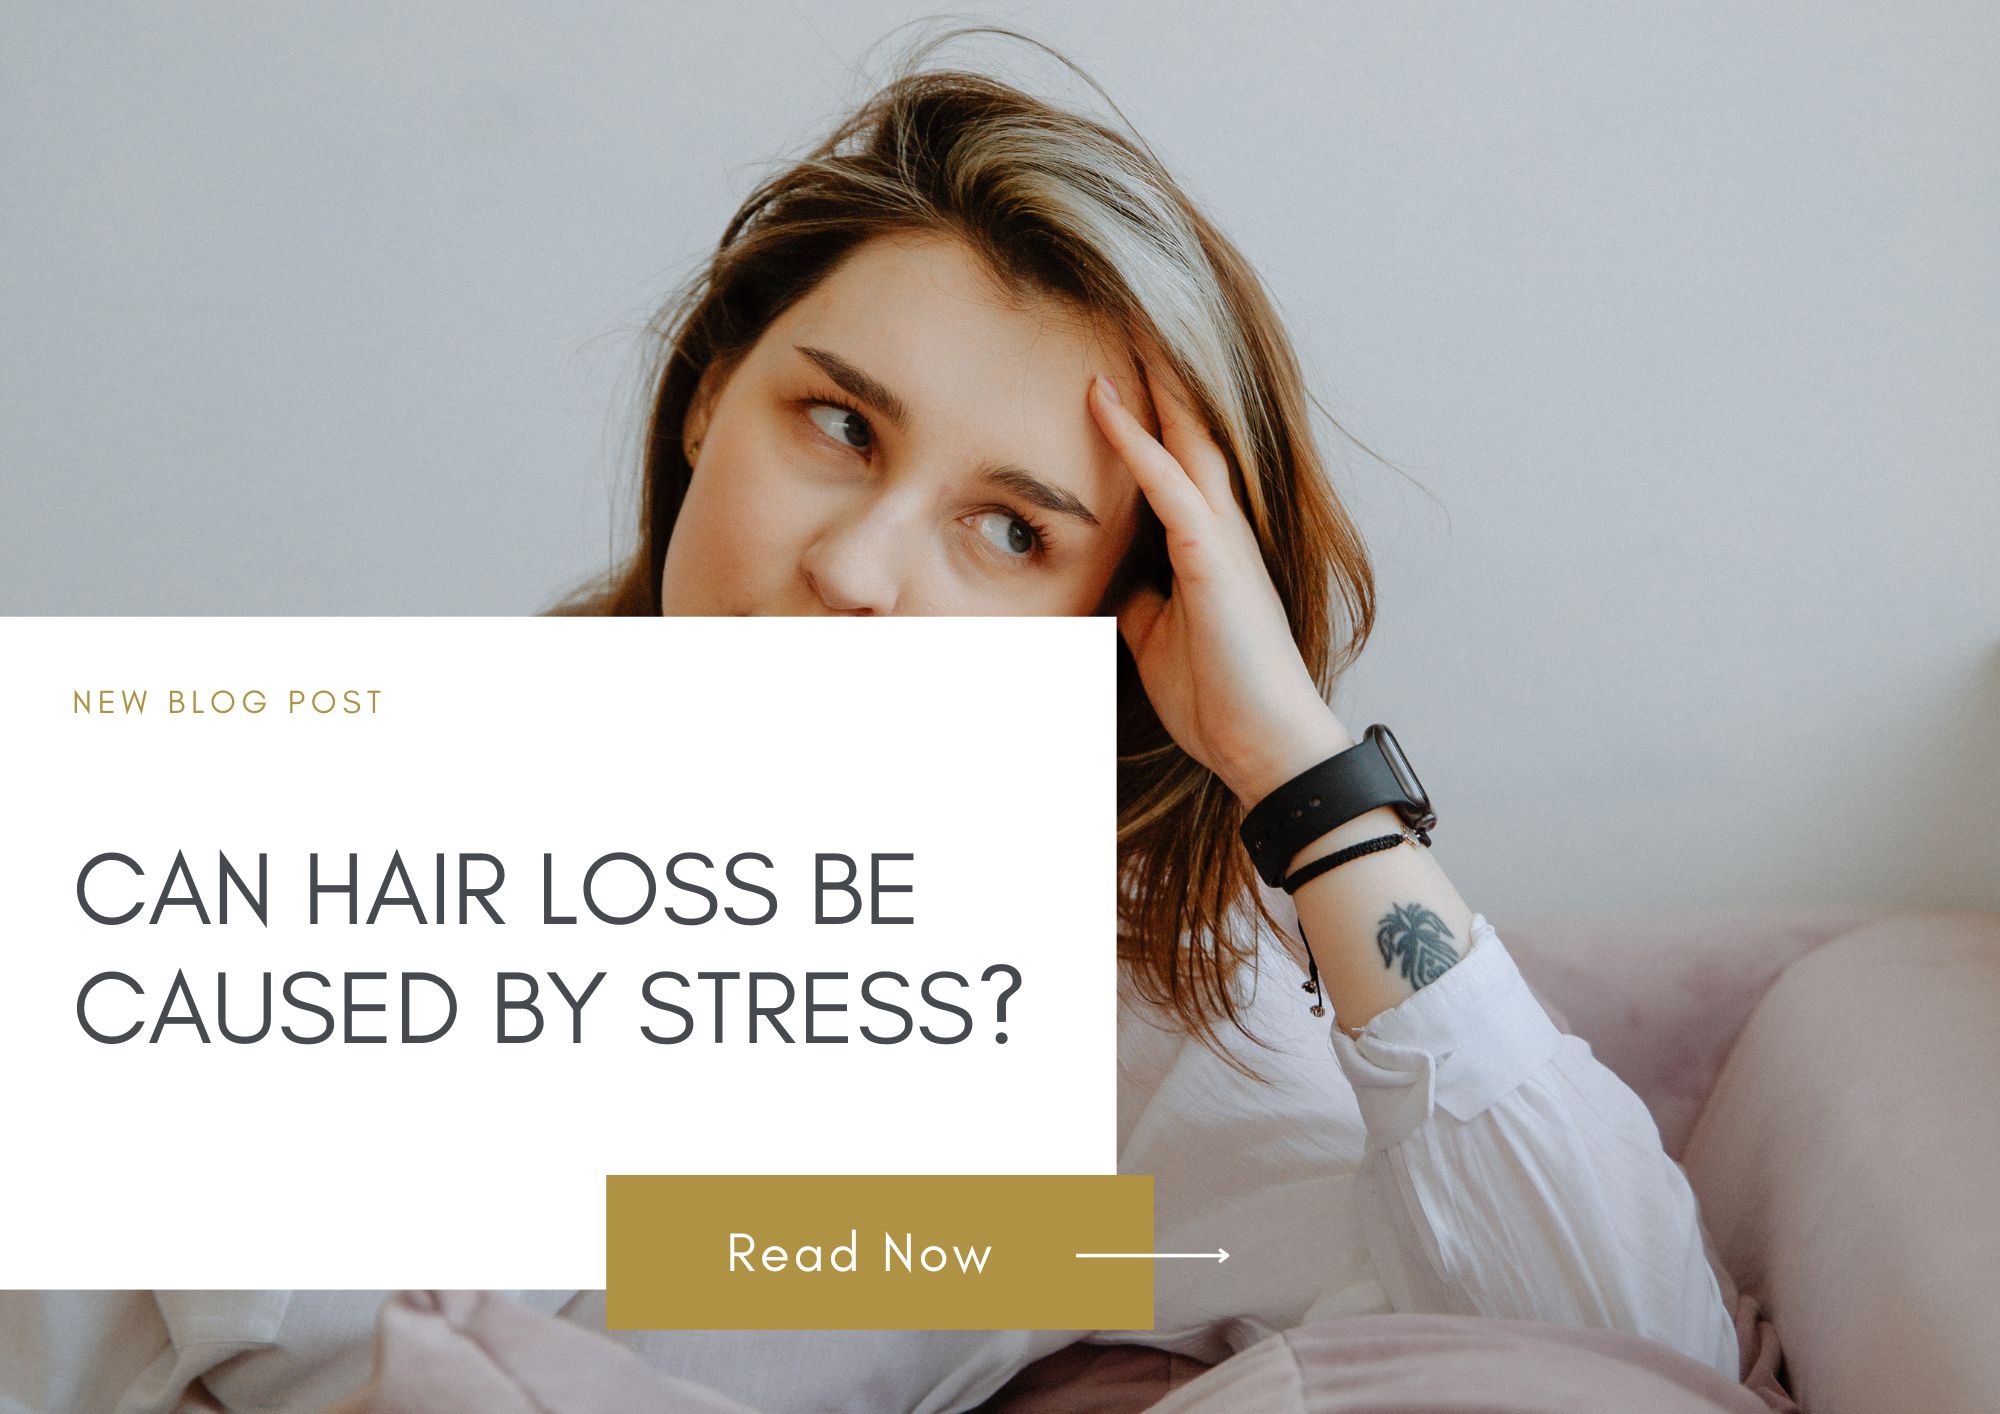 Can hair loss be caused by stress?